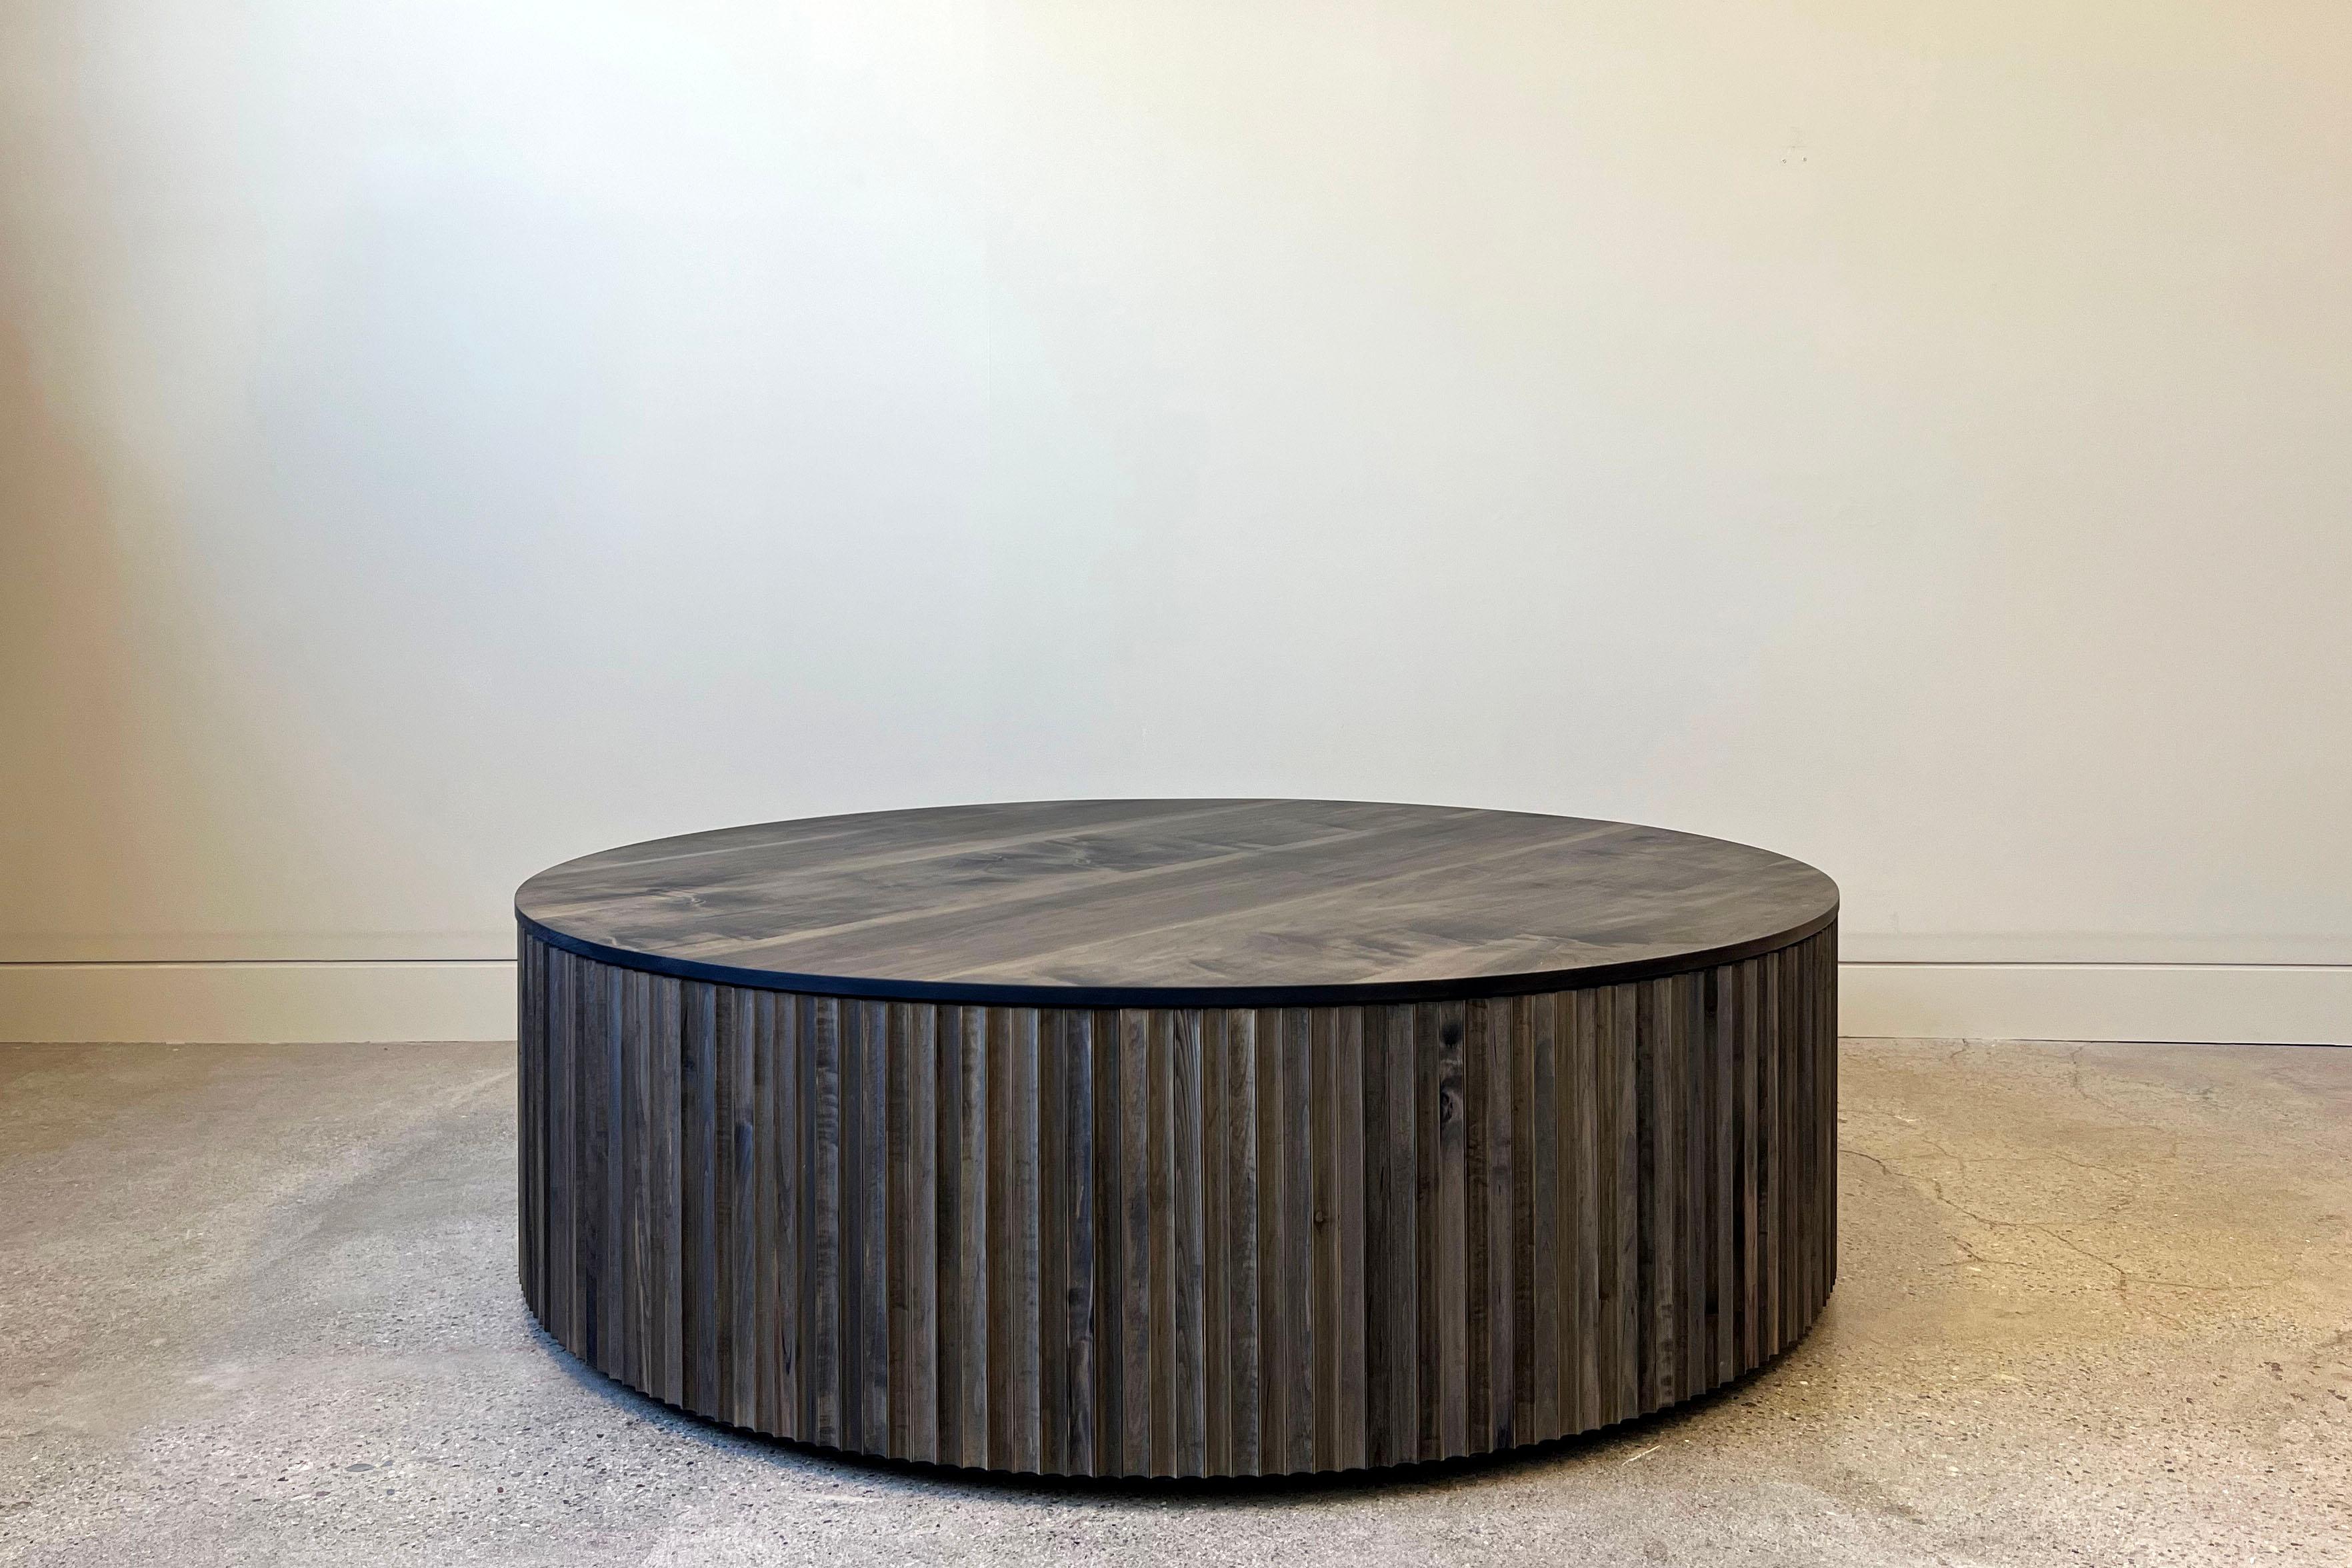 Made of solid American hardwoods, the Pilar Coffee, Occasional and End Tables provide both functionality and character in spaces such as a living room or hotel/office lobbies. 

With the ability to work in clusters or by themselves, they serve a